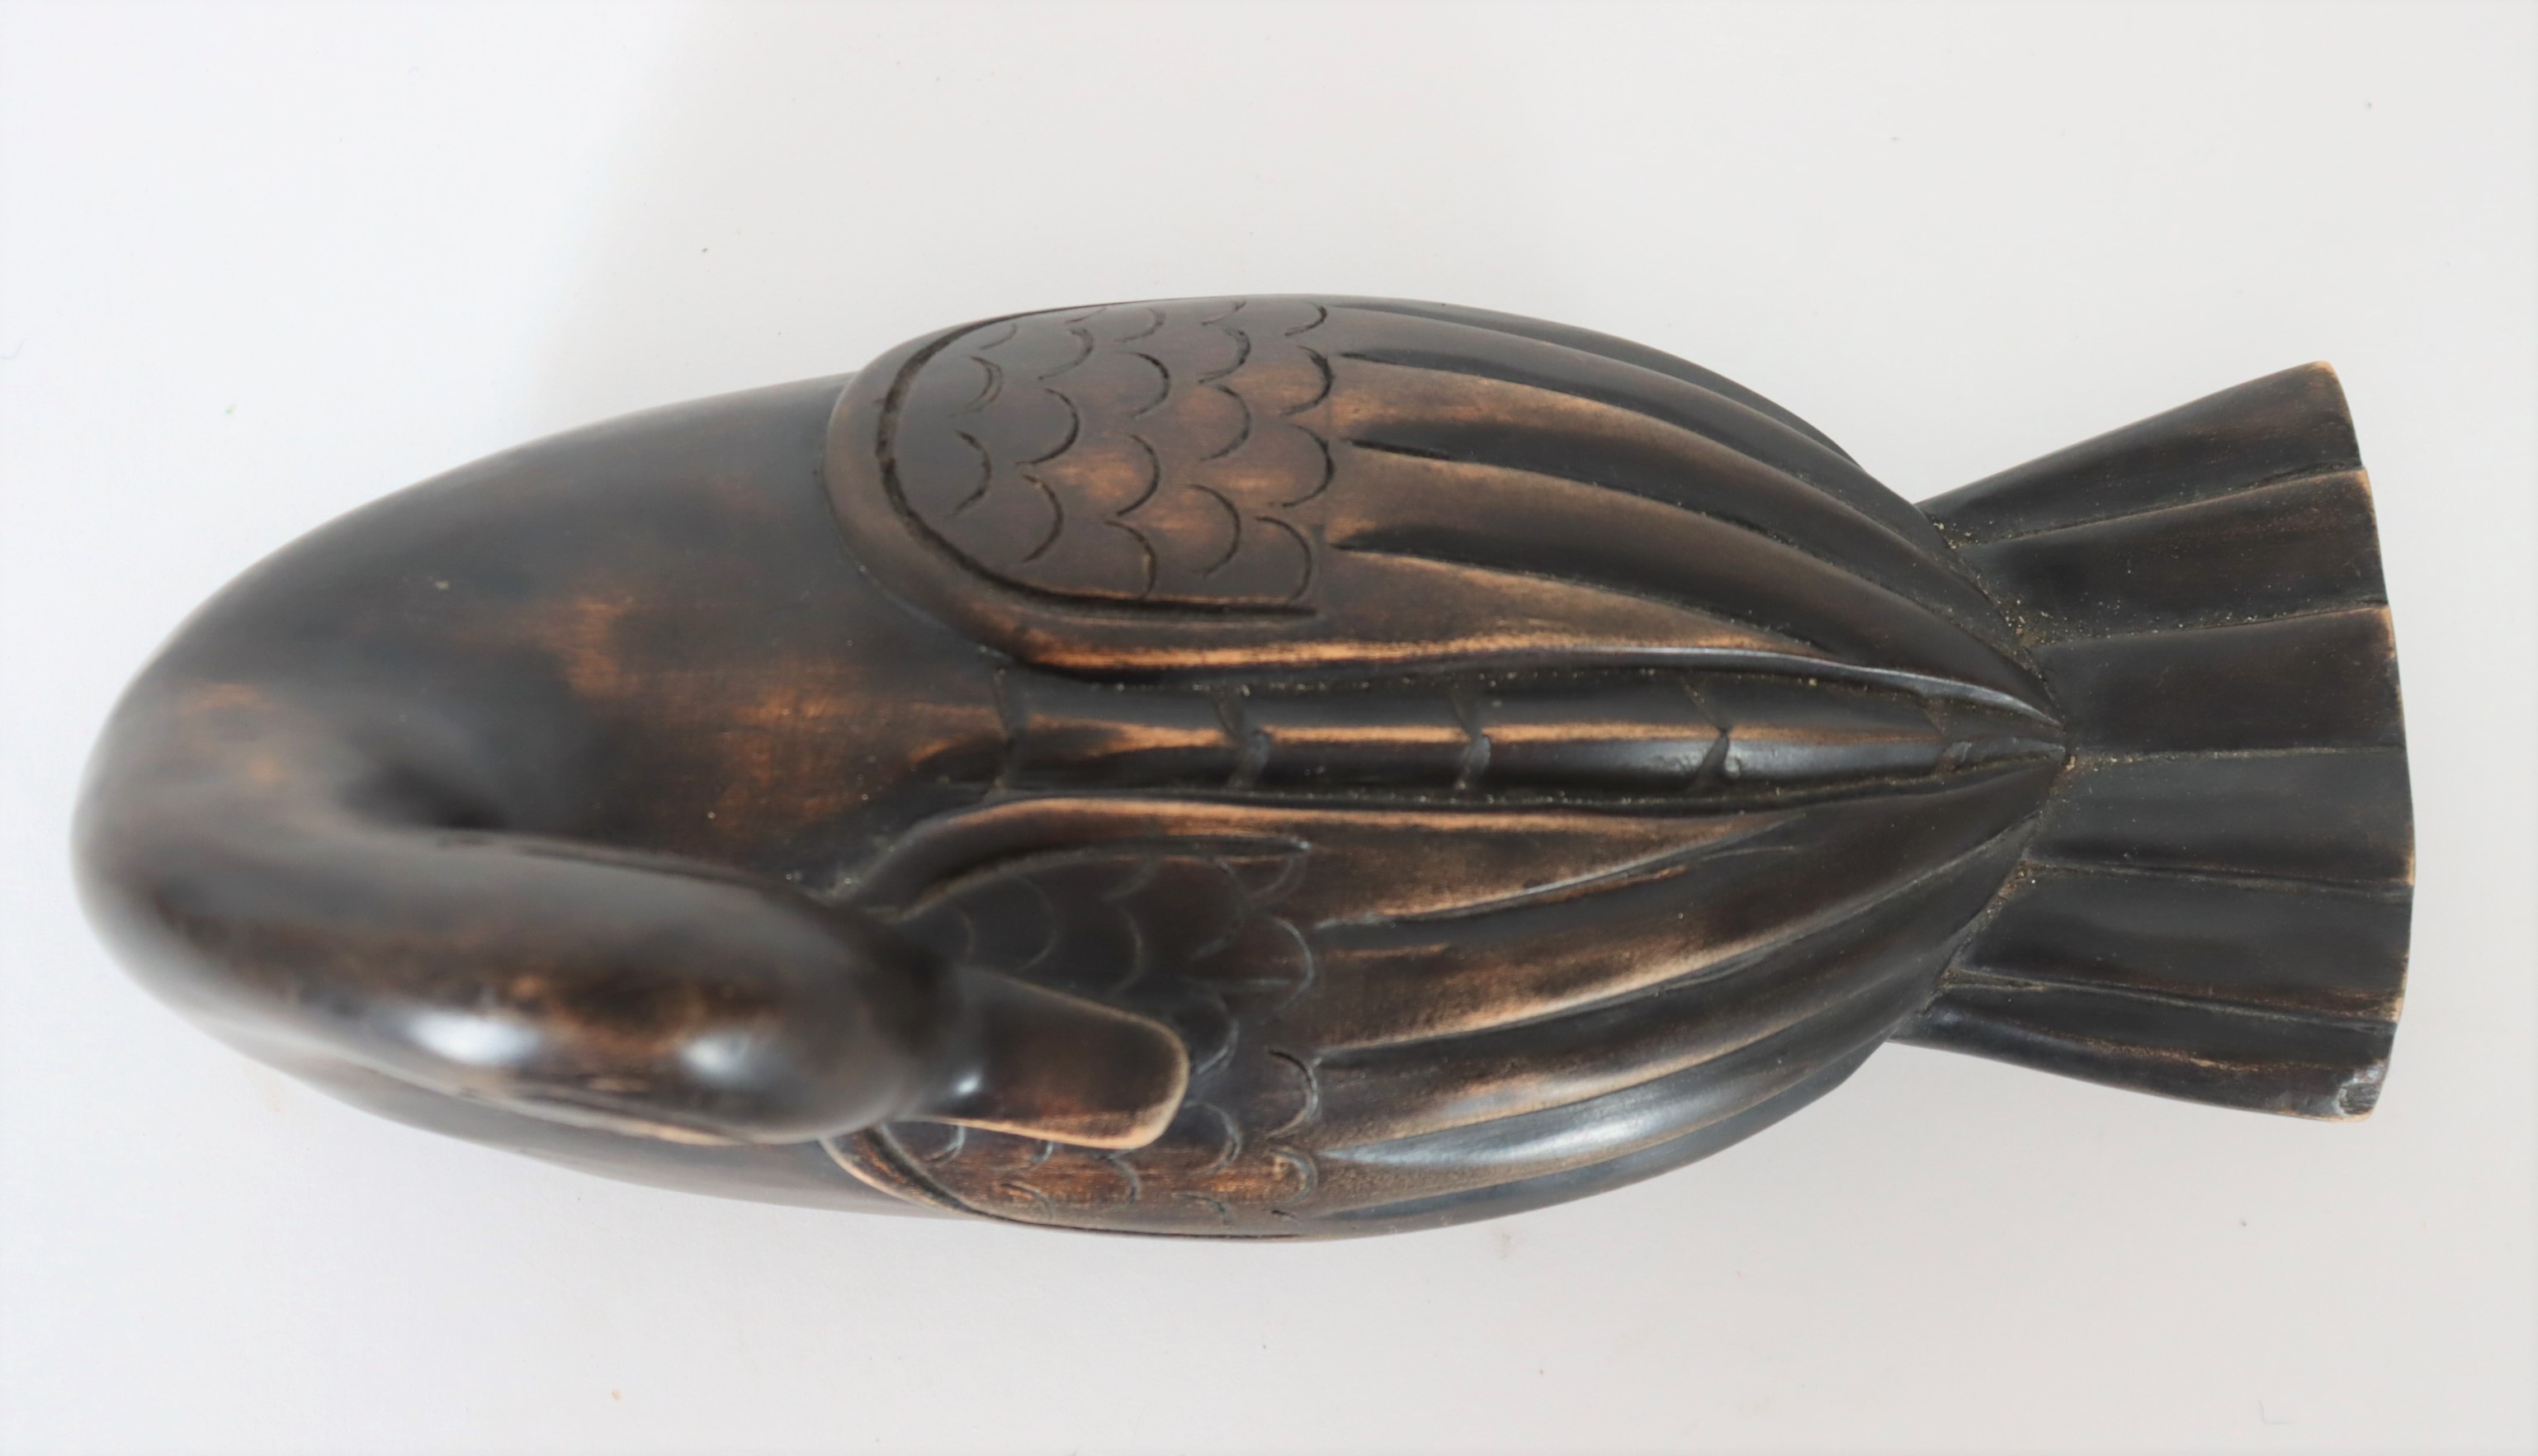 Vintage Hand-Carved Duck Container - Image 3 of 3